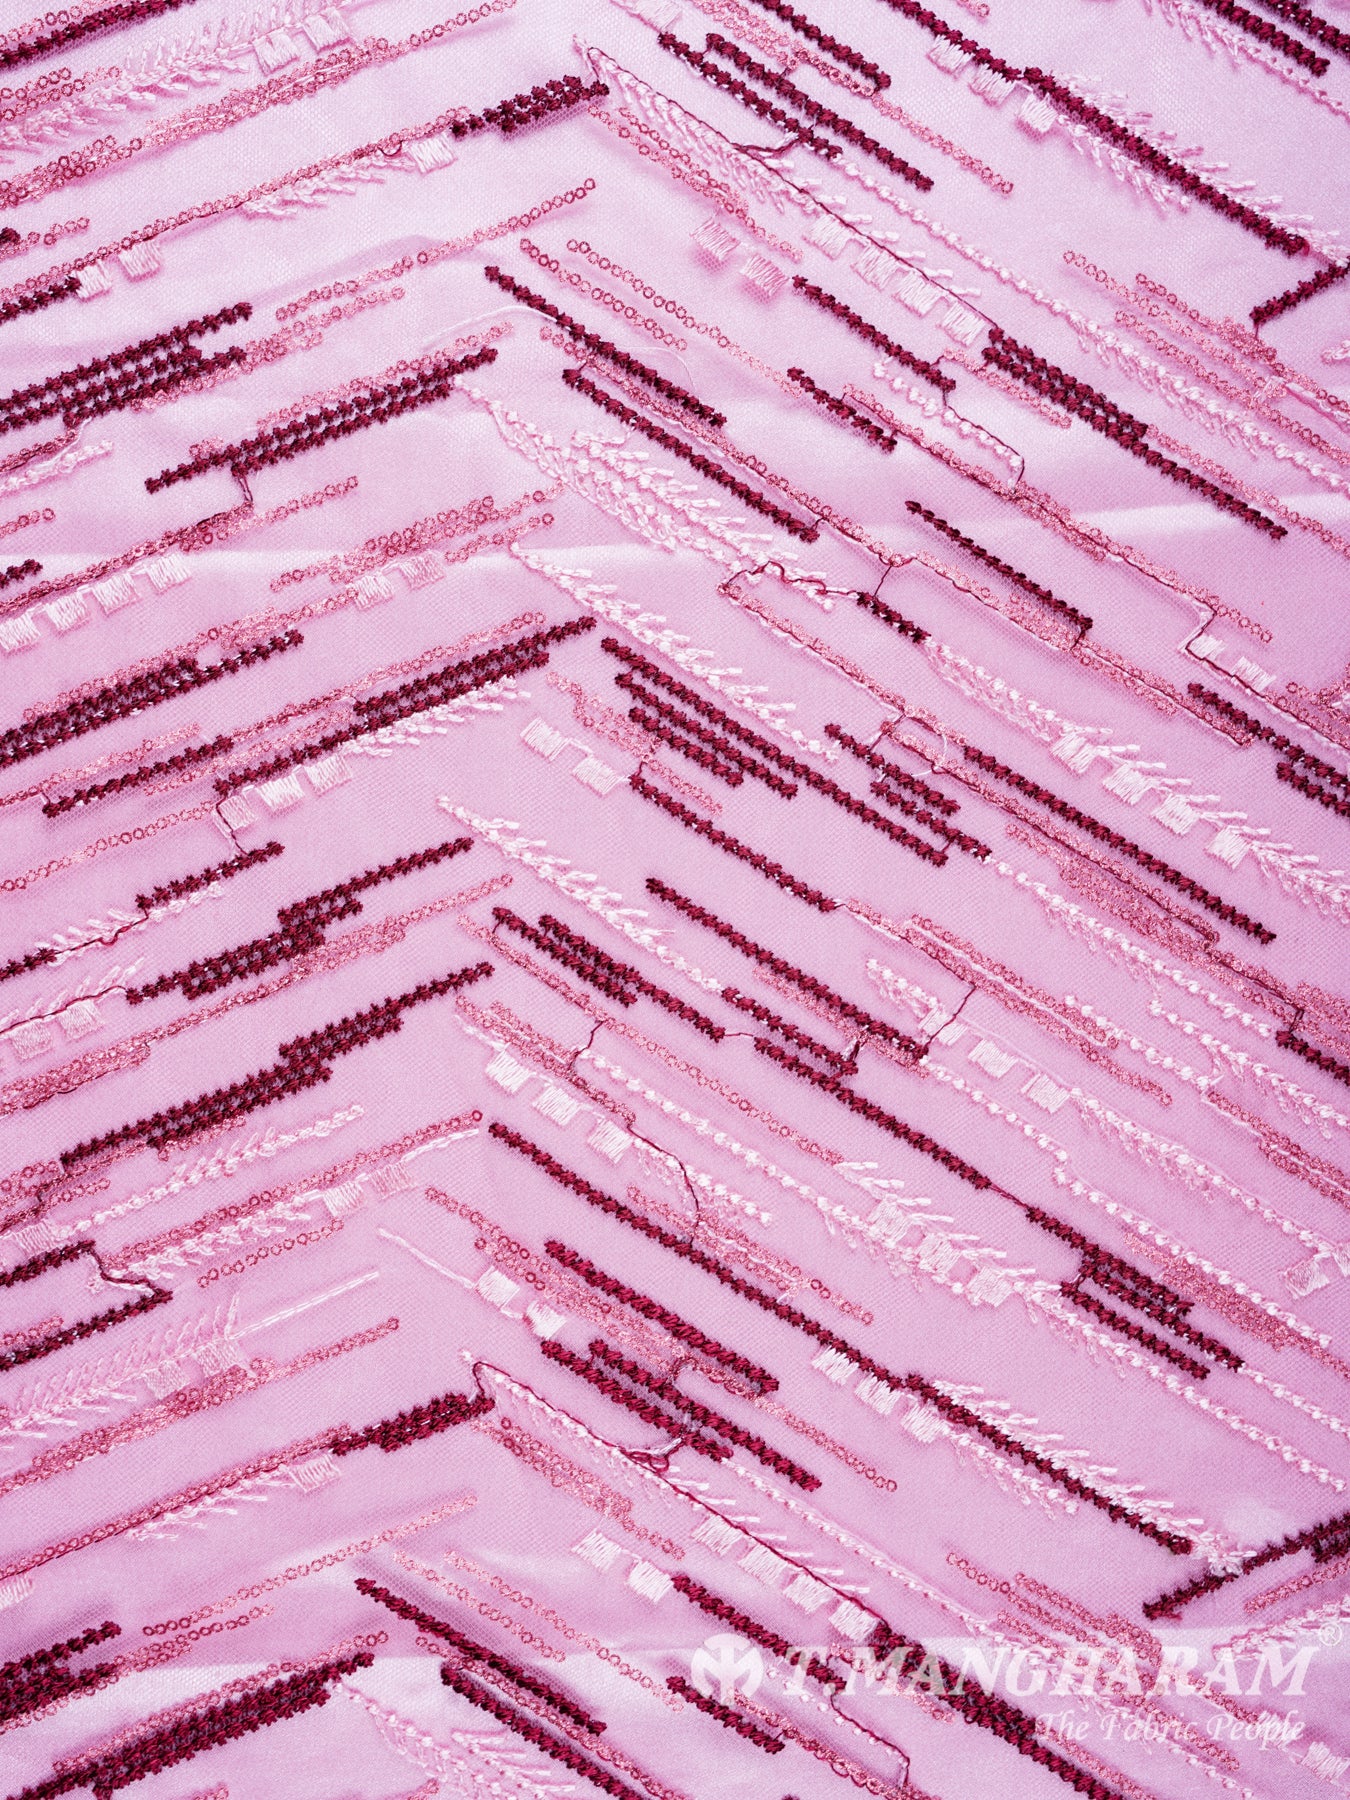 Pink Georgette Fabric - EC1116 VIEW-2